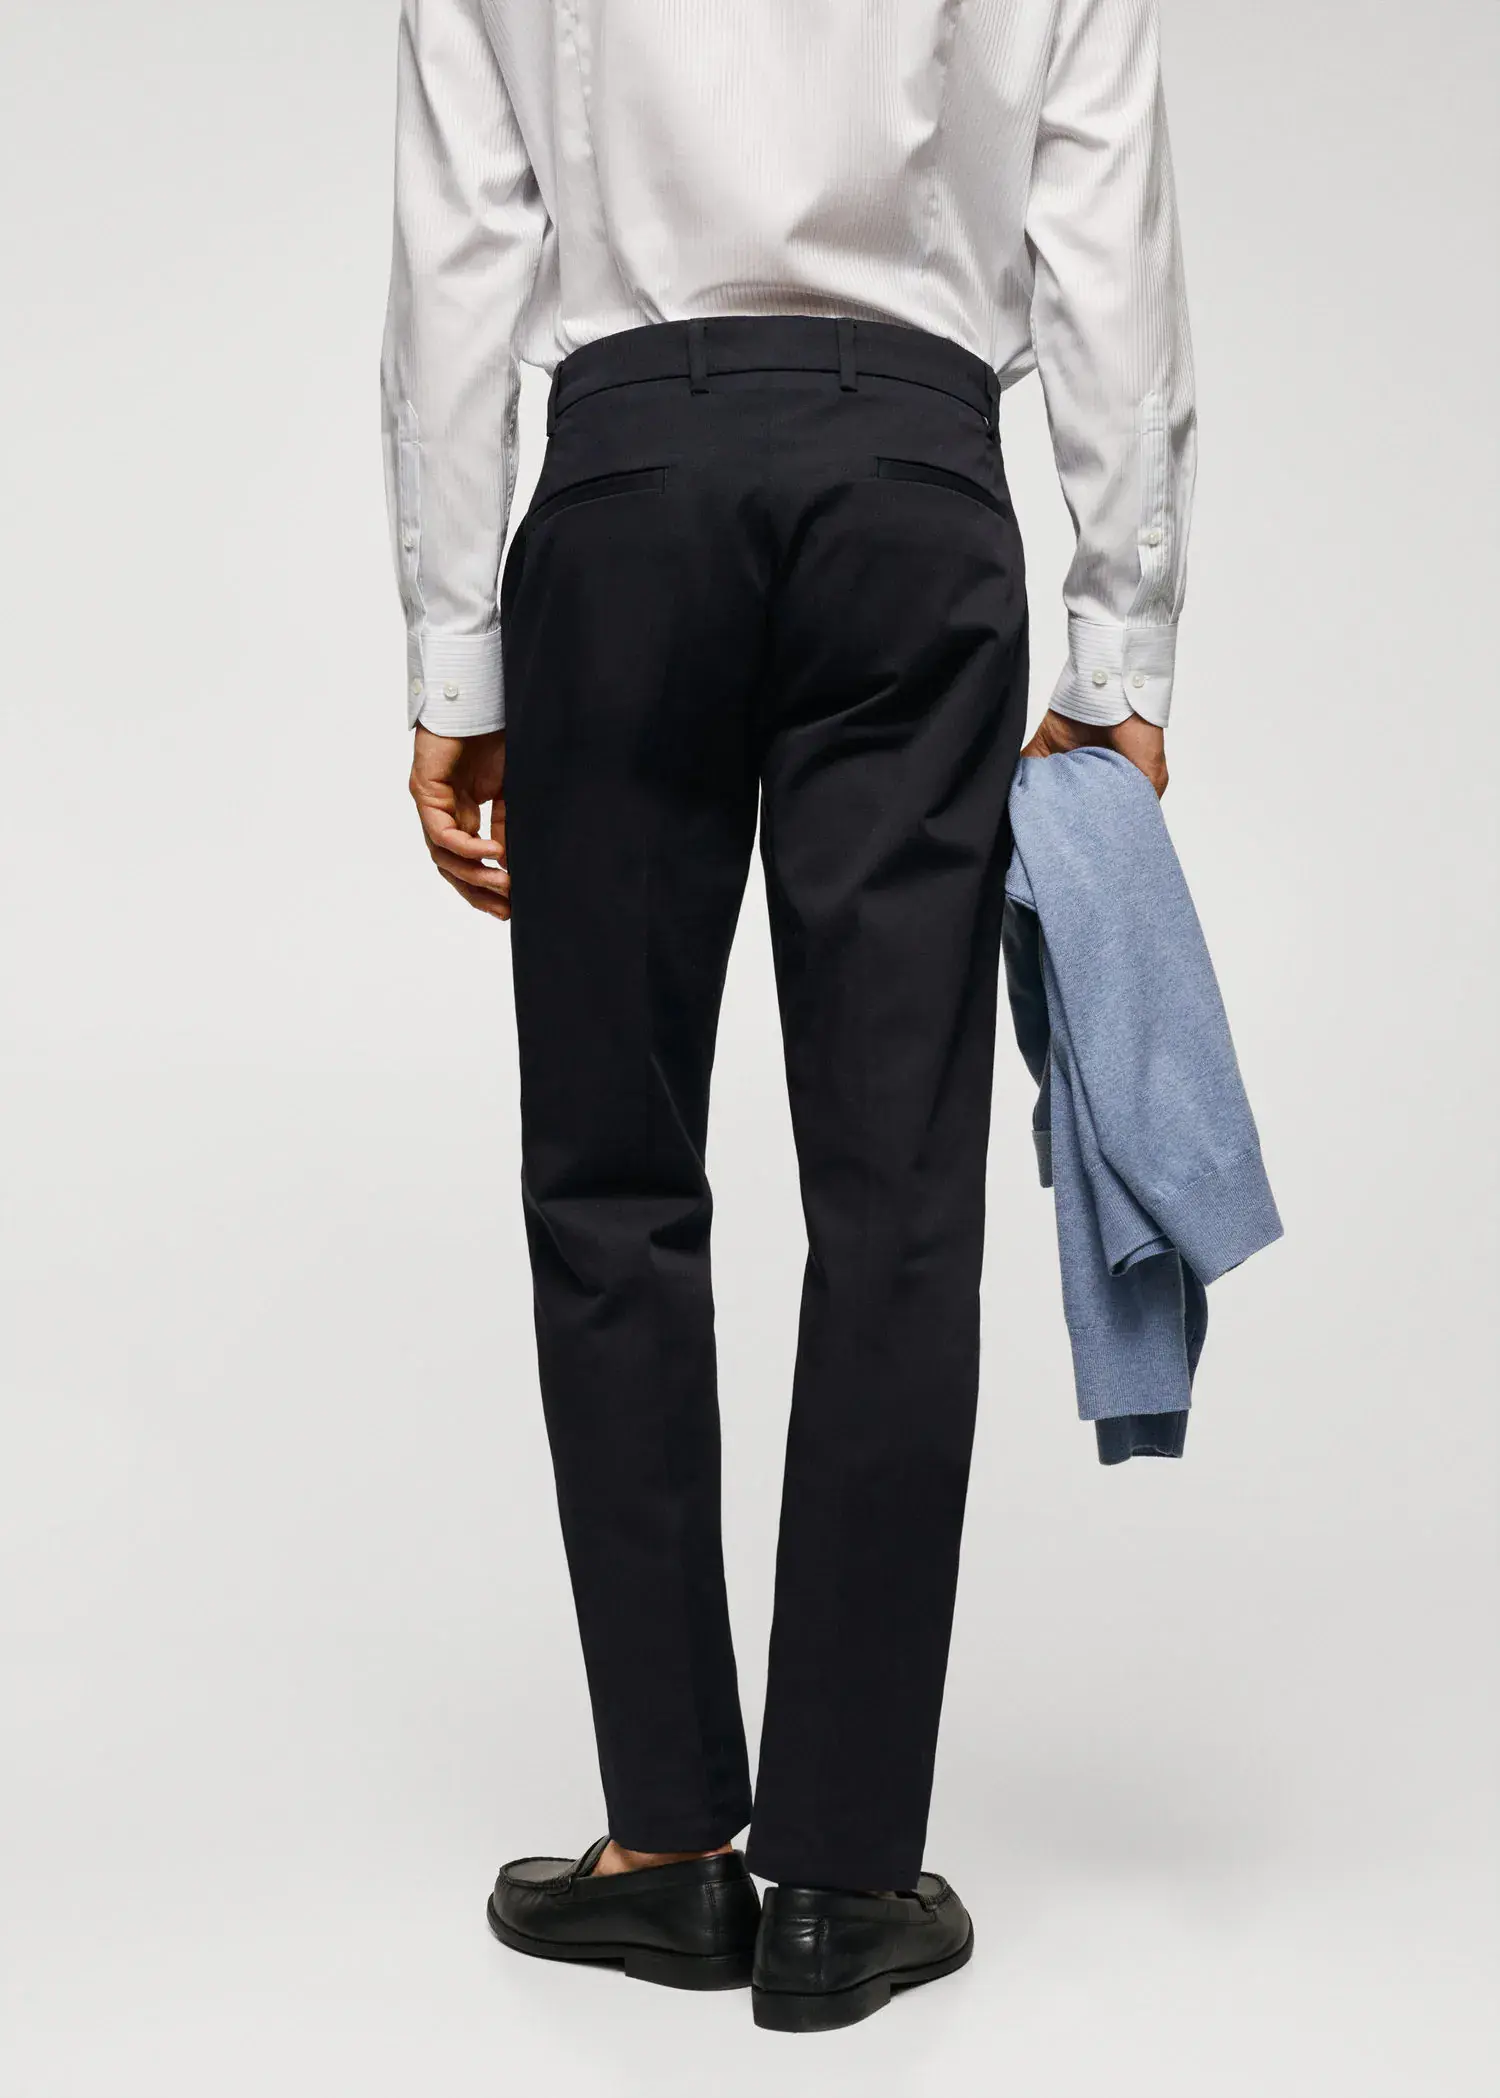 Mango Slim fit chino trousers. a man in a white dress shirt and black pants holding a jacket. 